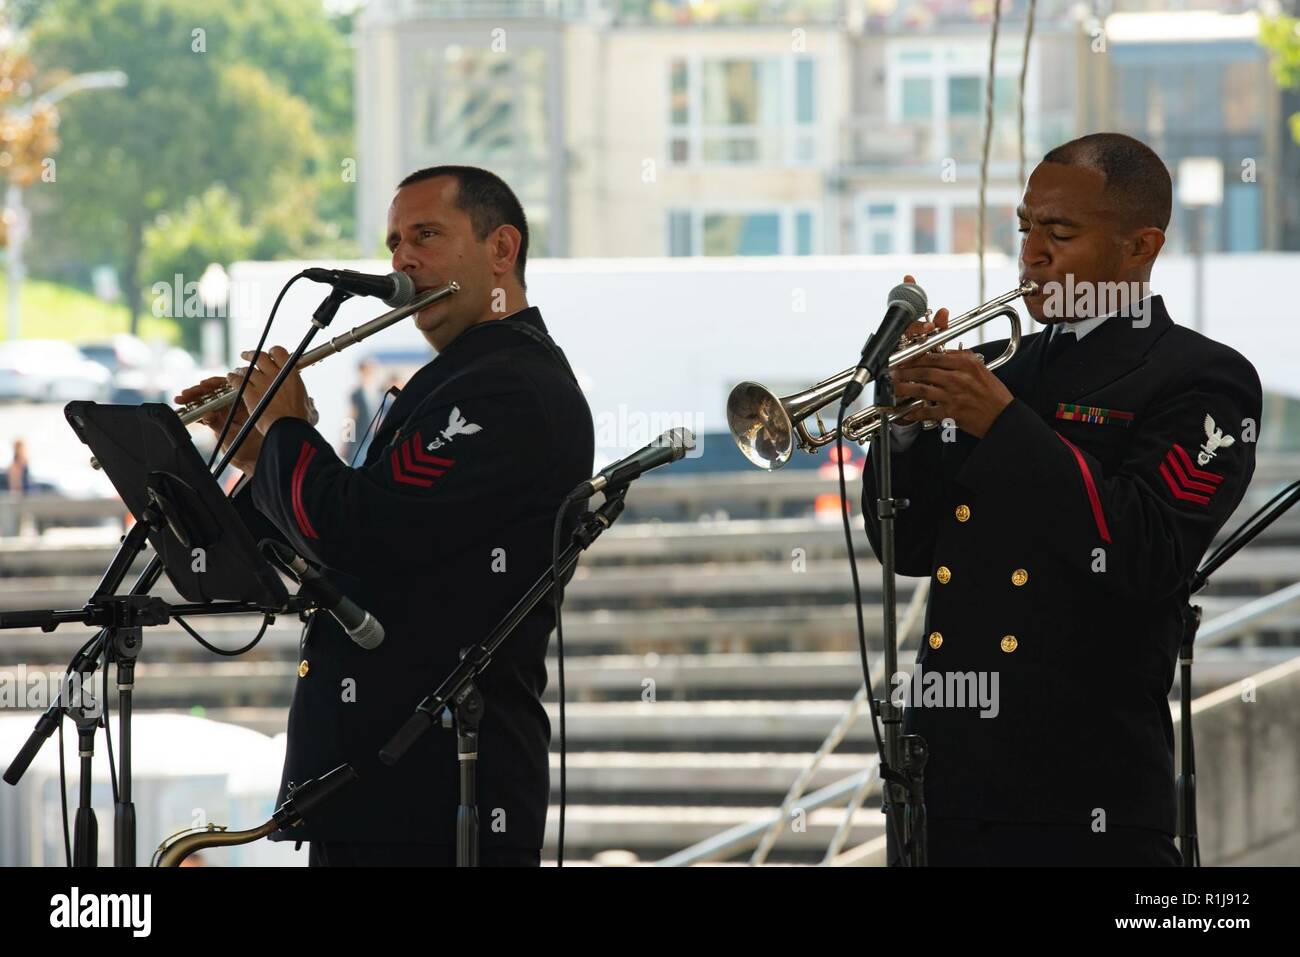 BALTIMORE (Oct. 7, 2018) Musicians 1st Class Manuel Pelayo de Góngora, left and David Smith, right of the U.S. Navy Band Cruisers perform in Baltimore’s Inner Harbor during Maryland Fleet Week and Air Show Baltimore. MDFWASB is Baltimore’s celebration of the sea services and provides an opportunity for the citizens of Maryland and the city of Baltimore to meet Sailors, Marines and Coast Guardsmen, as well as see firsthand the latest capabilities of today’s maritime services. Stock Photo